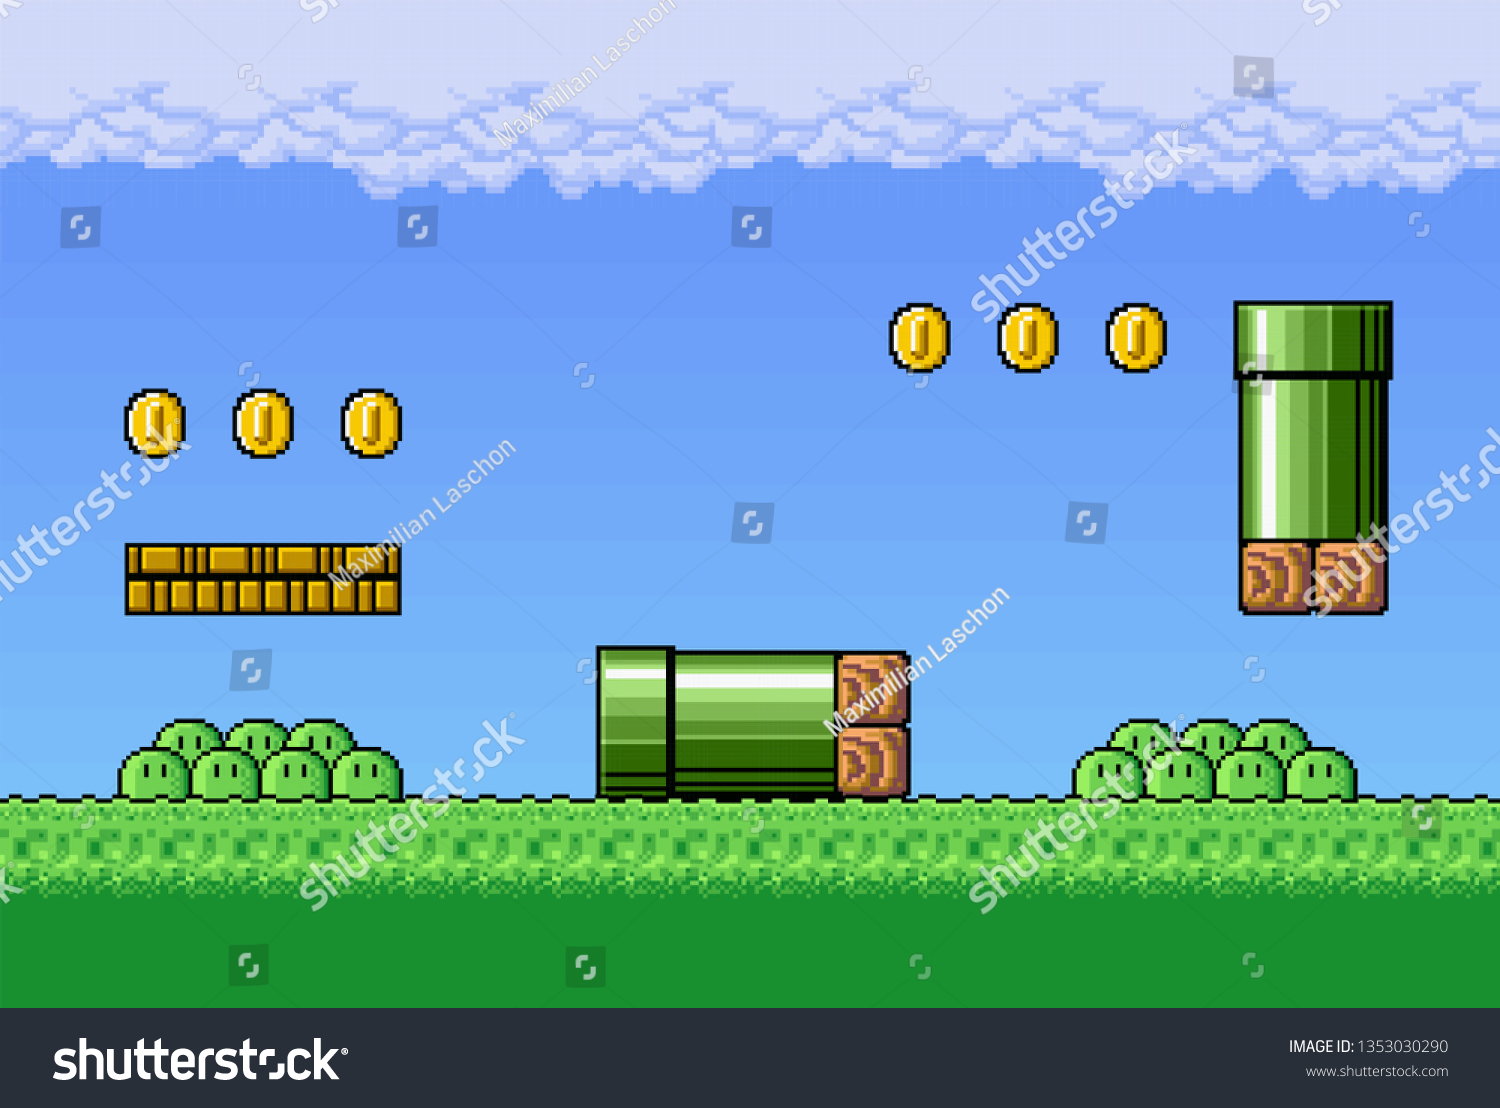 2d Pixel Art Retro Game Assets Stock Vector Royalty Free